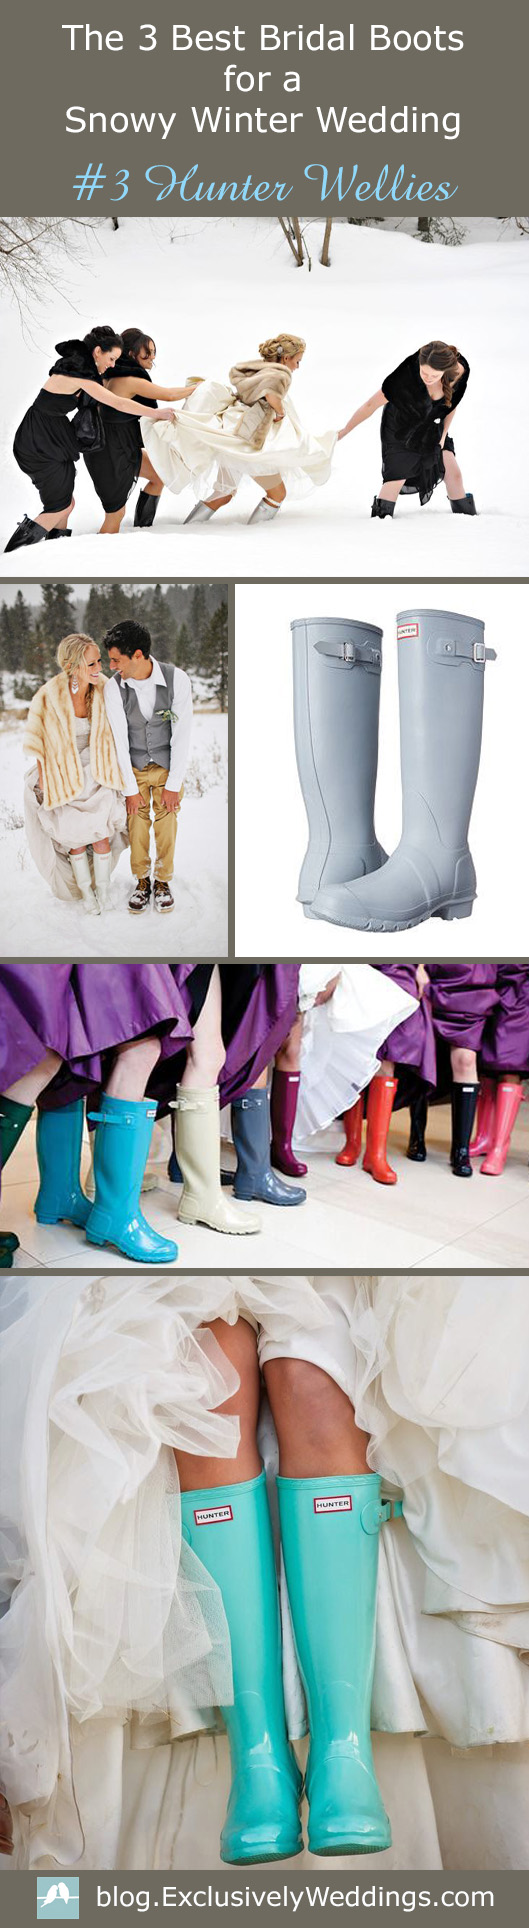 The_3_Best_Bridal_Boots_for_a_Snowy_Winter_Wedding_-Hunter Wellies